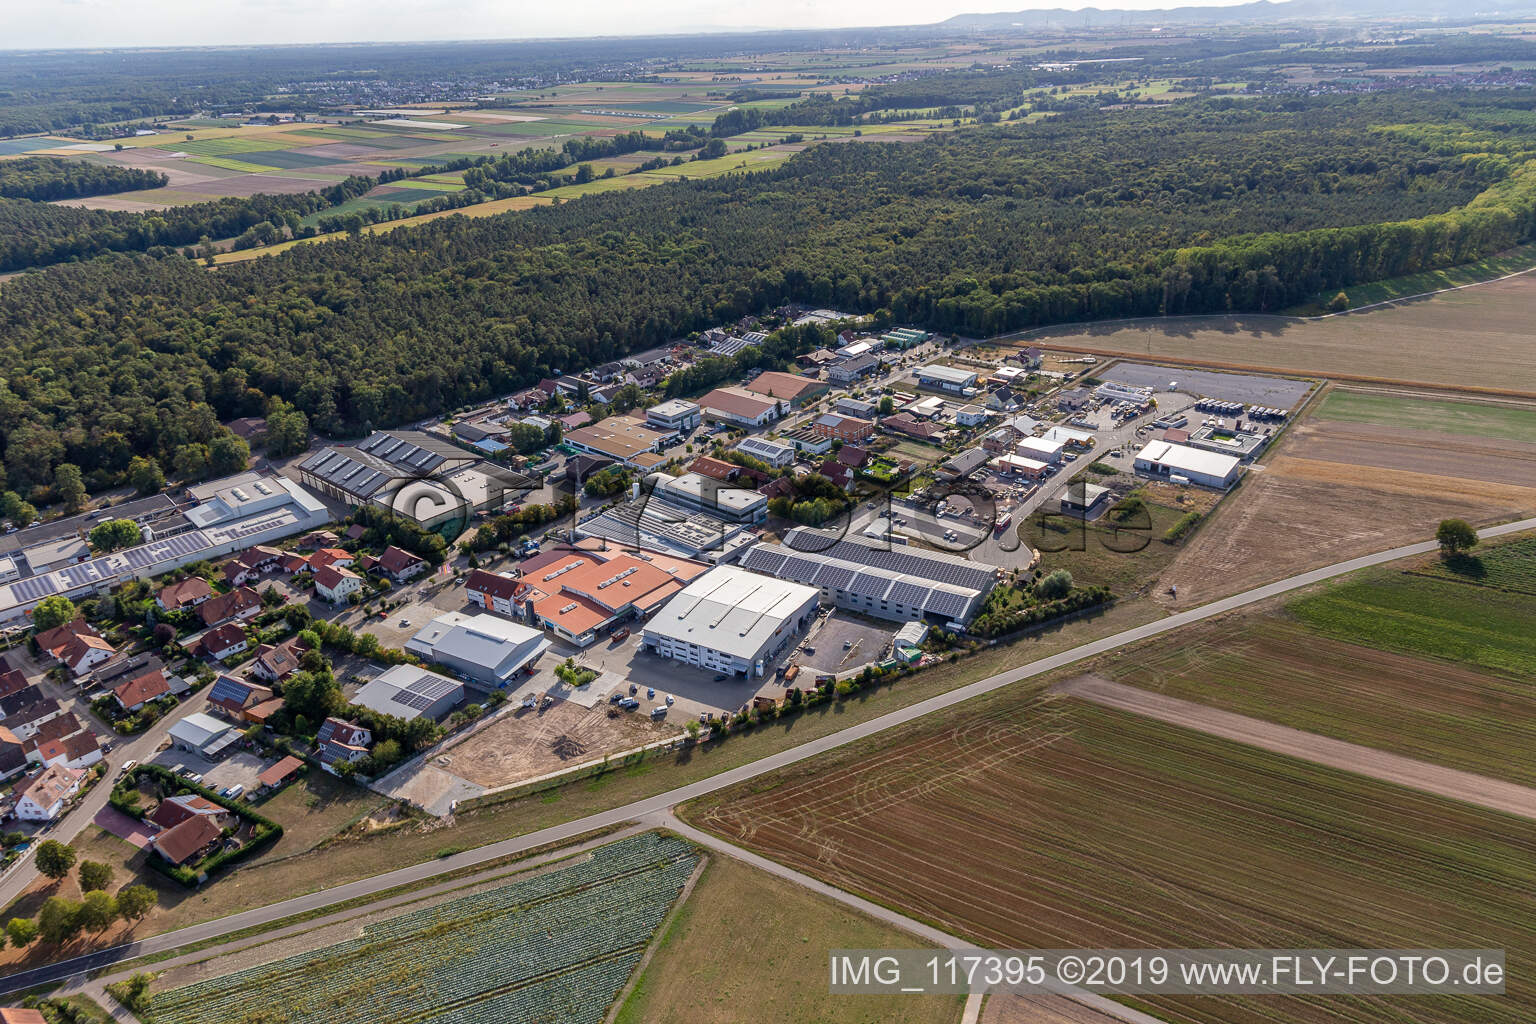 Commercial area Im Gereut, HGGS LaserCUT GmbH & Co. KG in Hatzenbühl in the state Rhineland-Palatinate, Germany out of the air